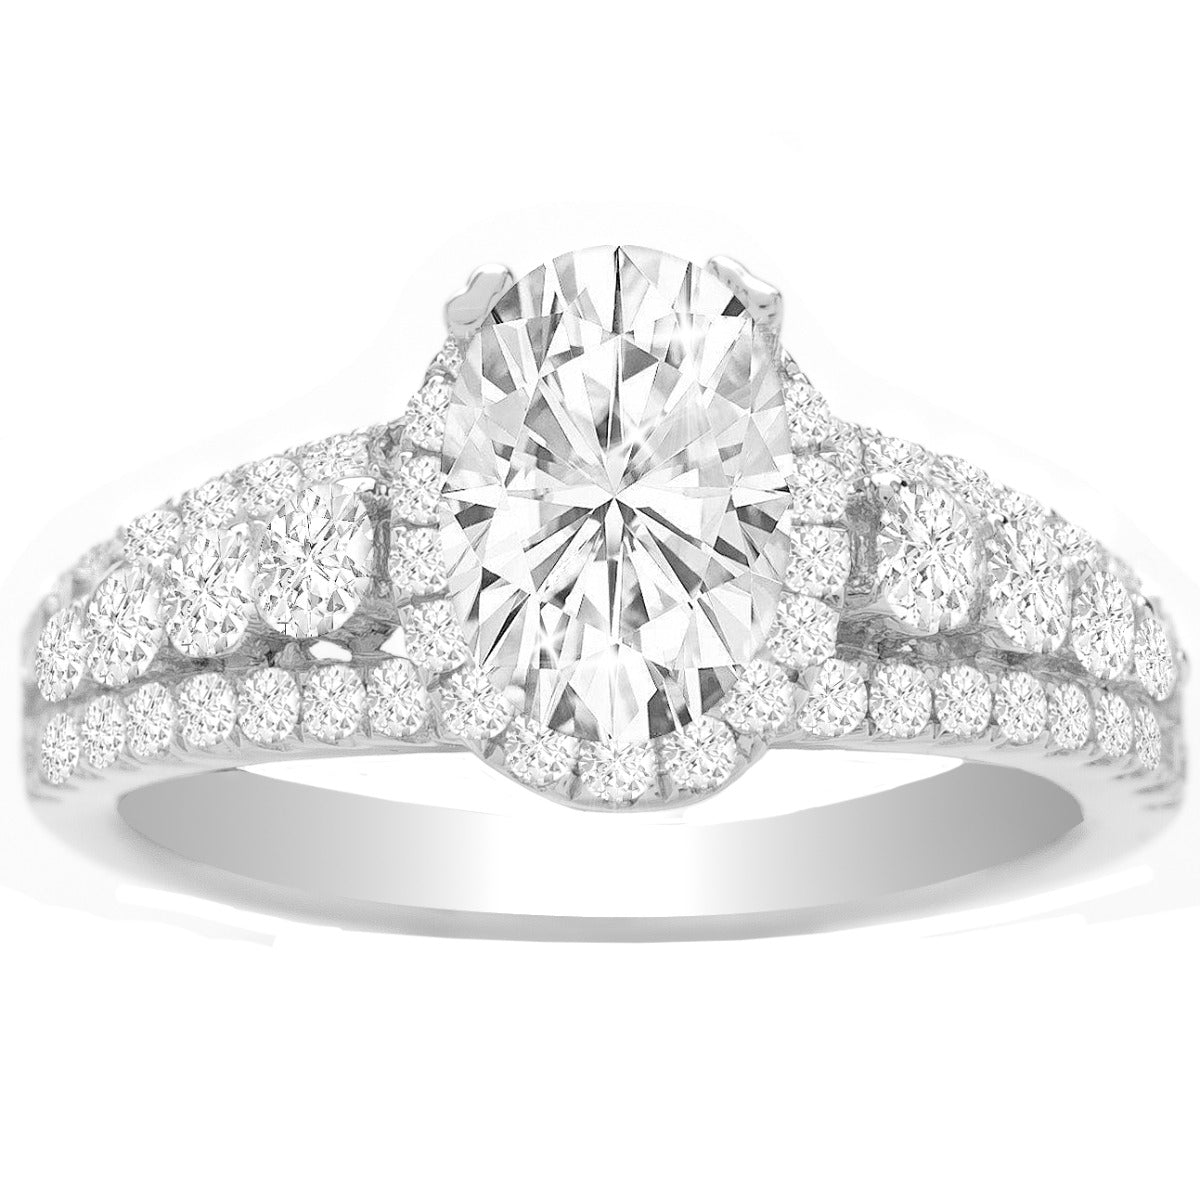 Gendra Diamond Oval Halo Engagement Ring in 14K White Gold- 0.70 ctw